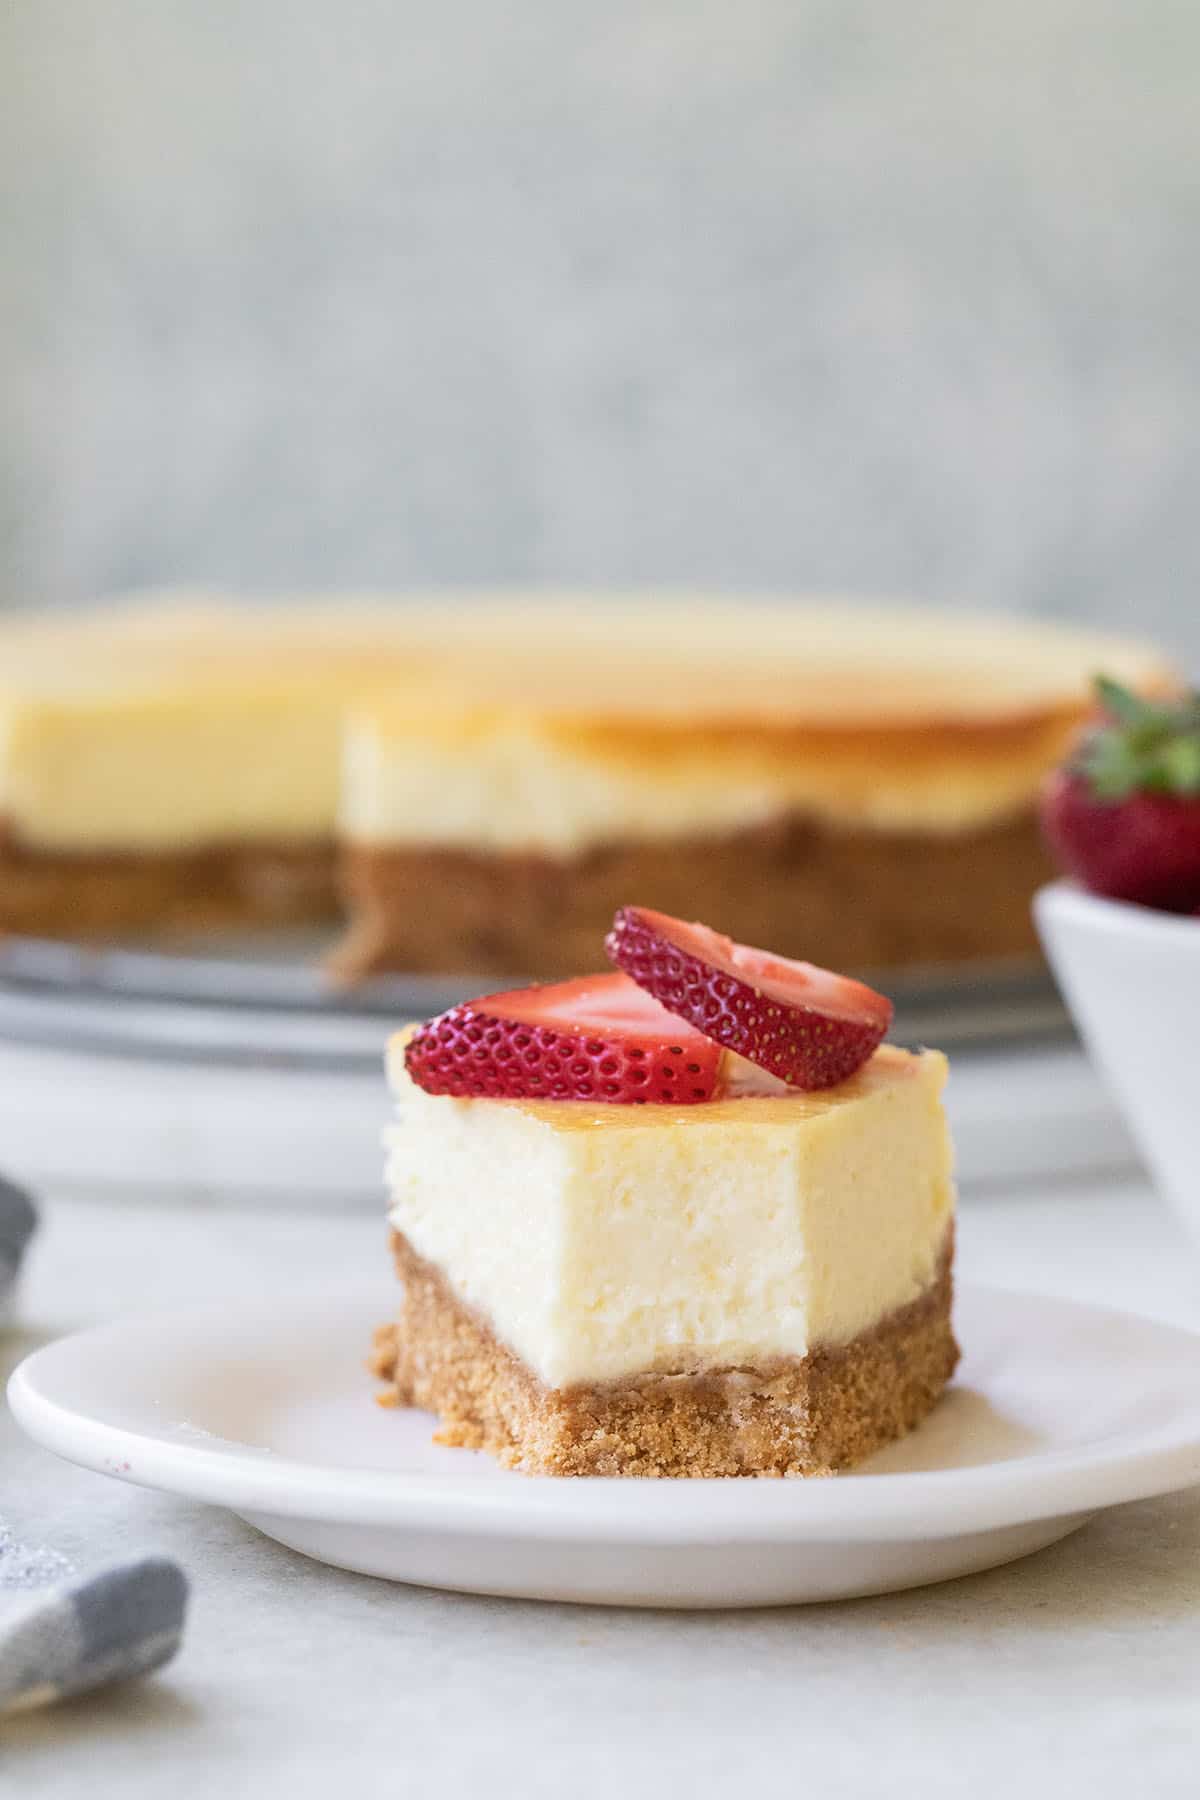 Simple cheesecake recipe with a bite taken out.